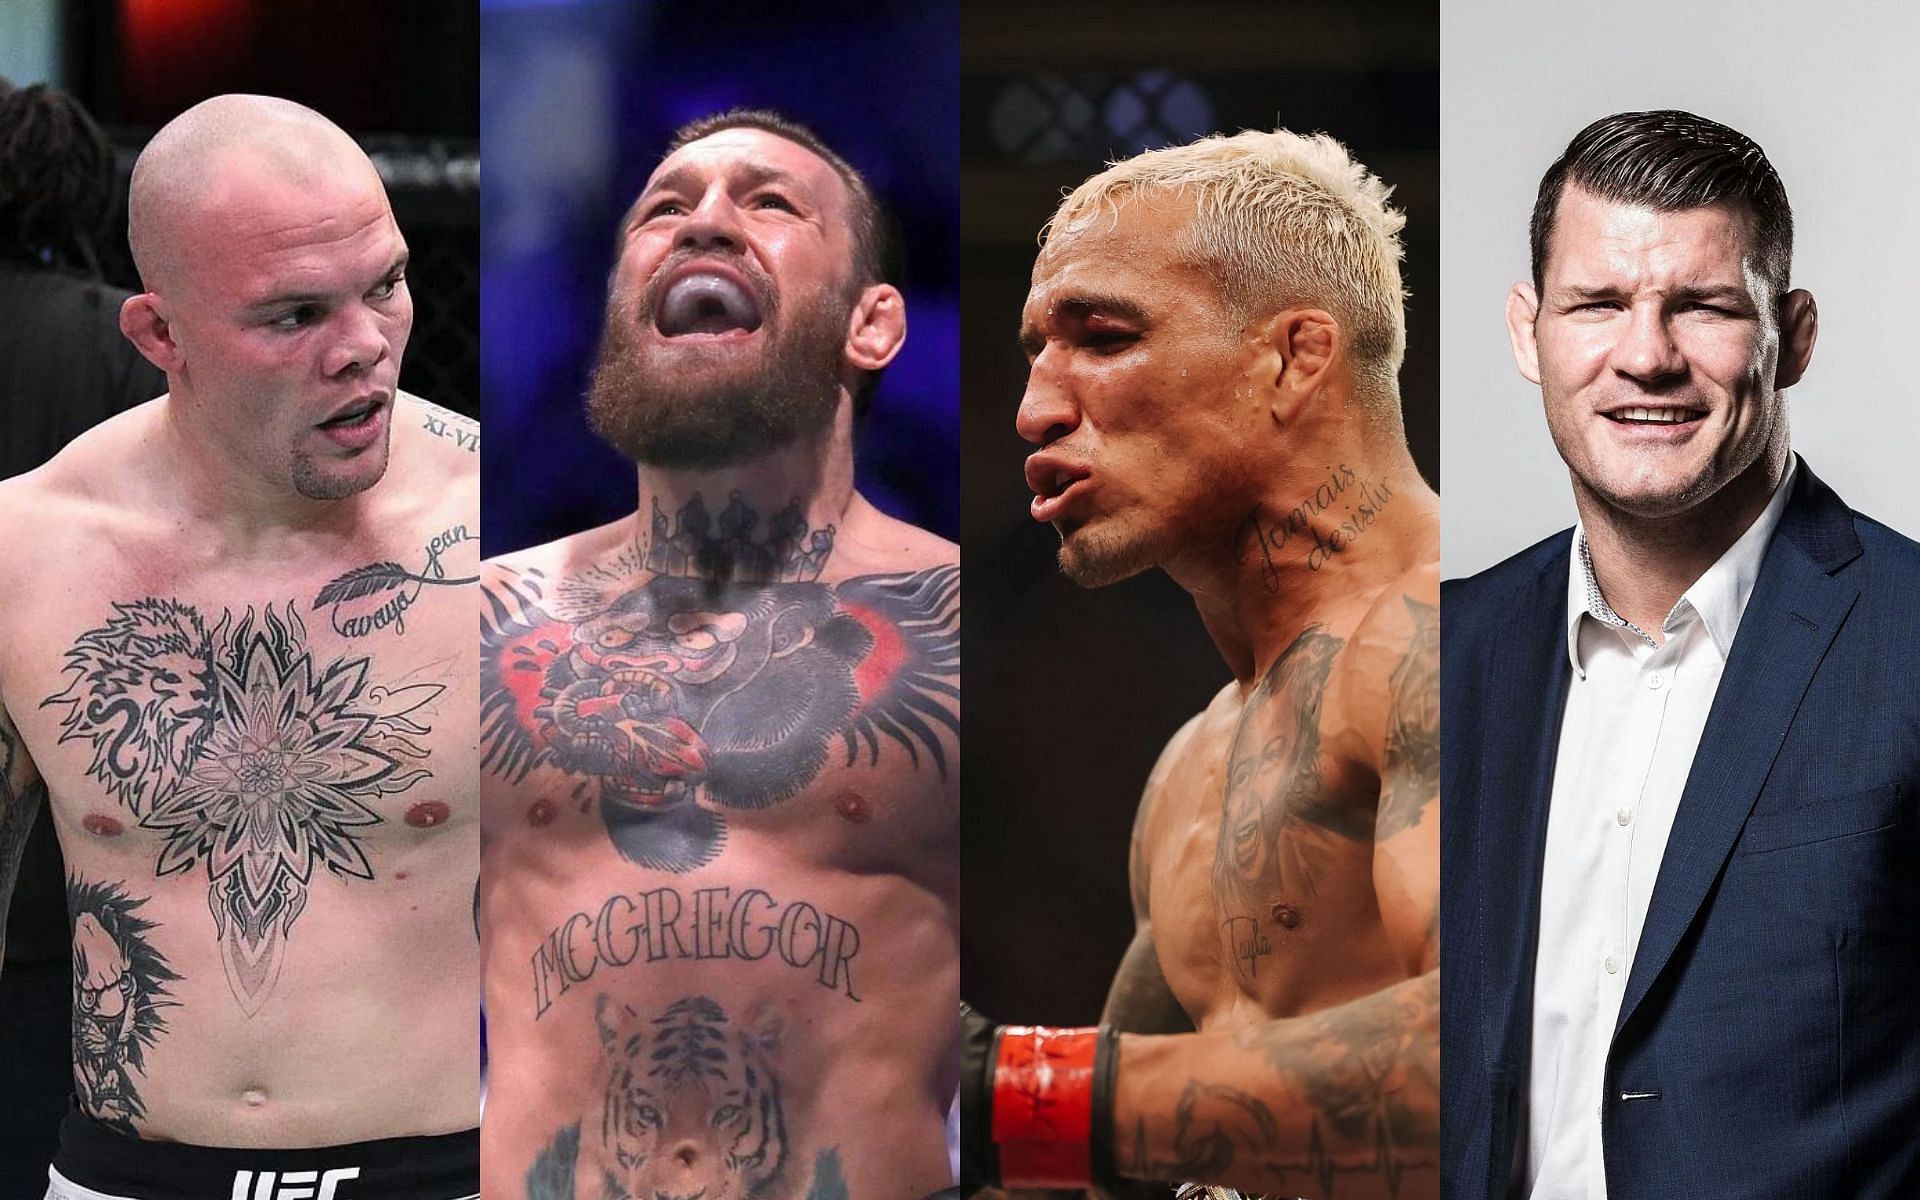 From L-R: Anthony Smith, Conor McGregor, Charles Oliveira, Michael Bisping